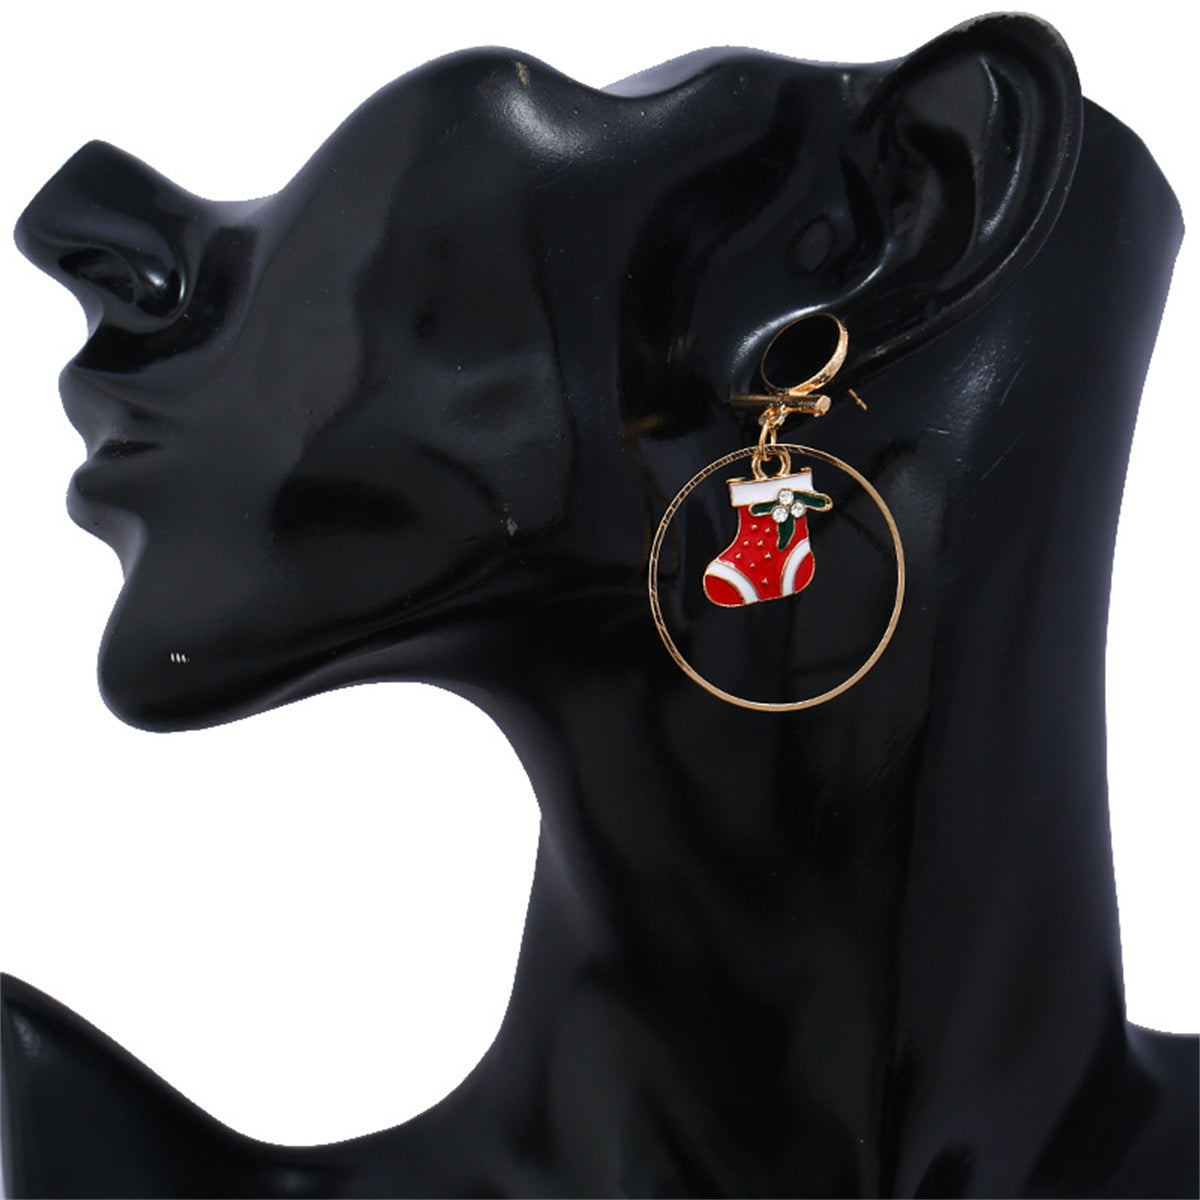 Red Enamel & 18K Gold-Plated Cubic Zirconia-Accent Stocking Circle Drop Earrings